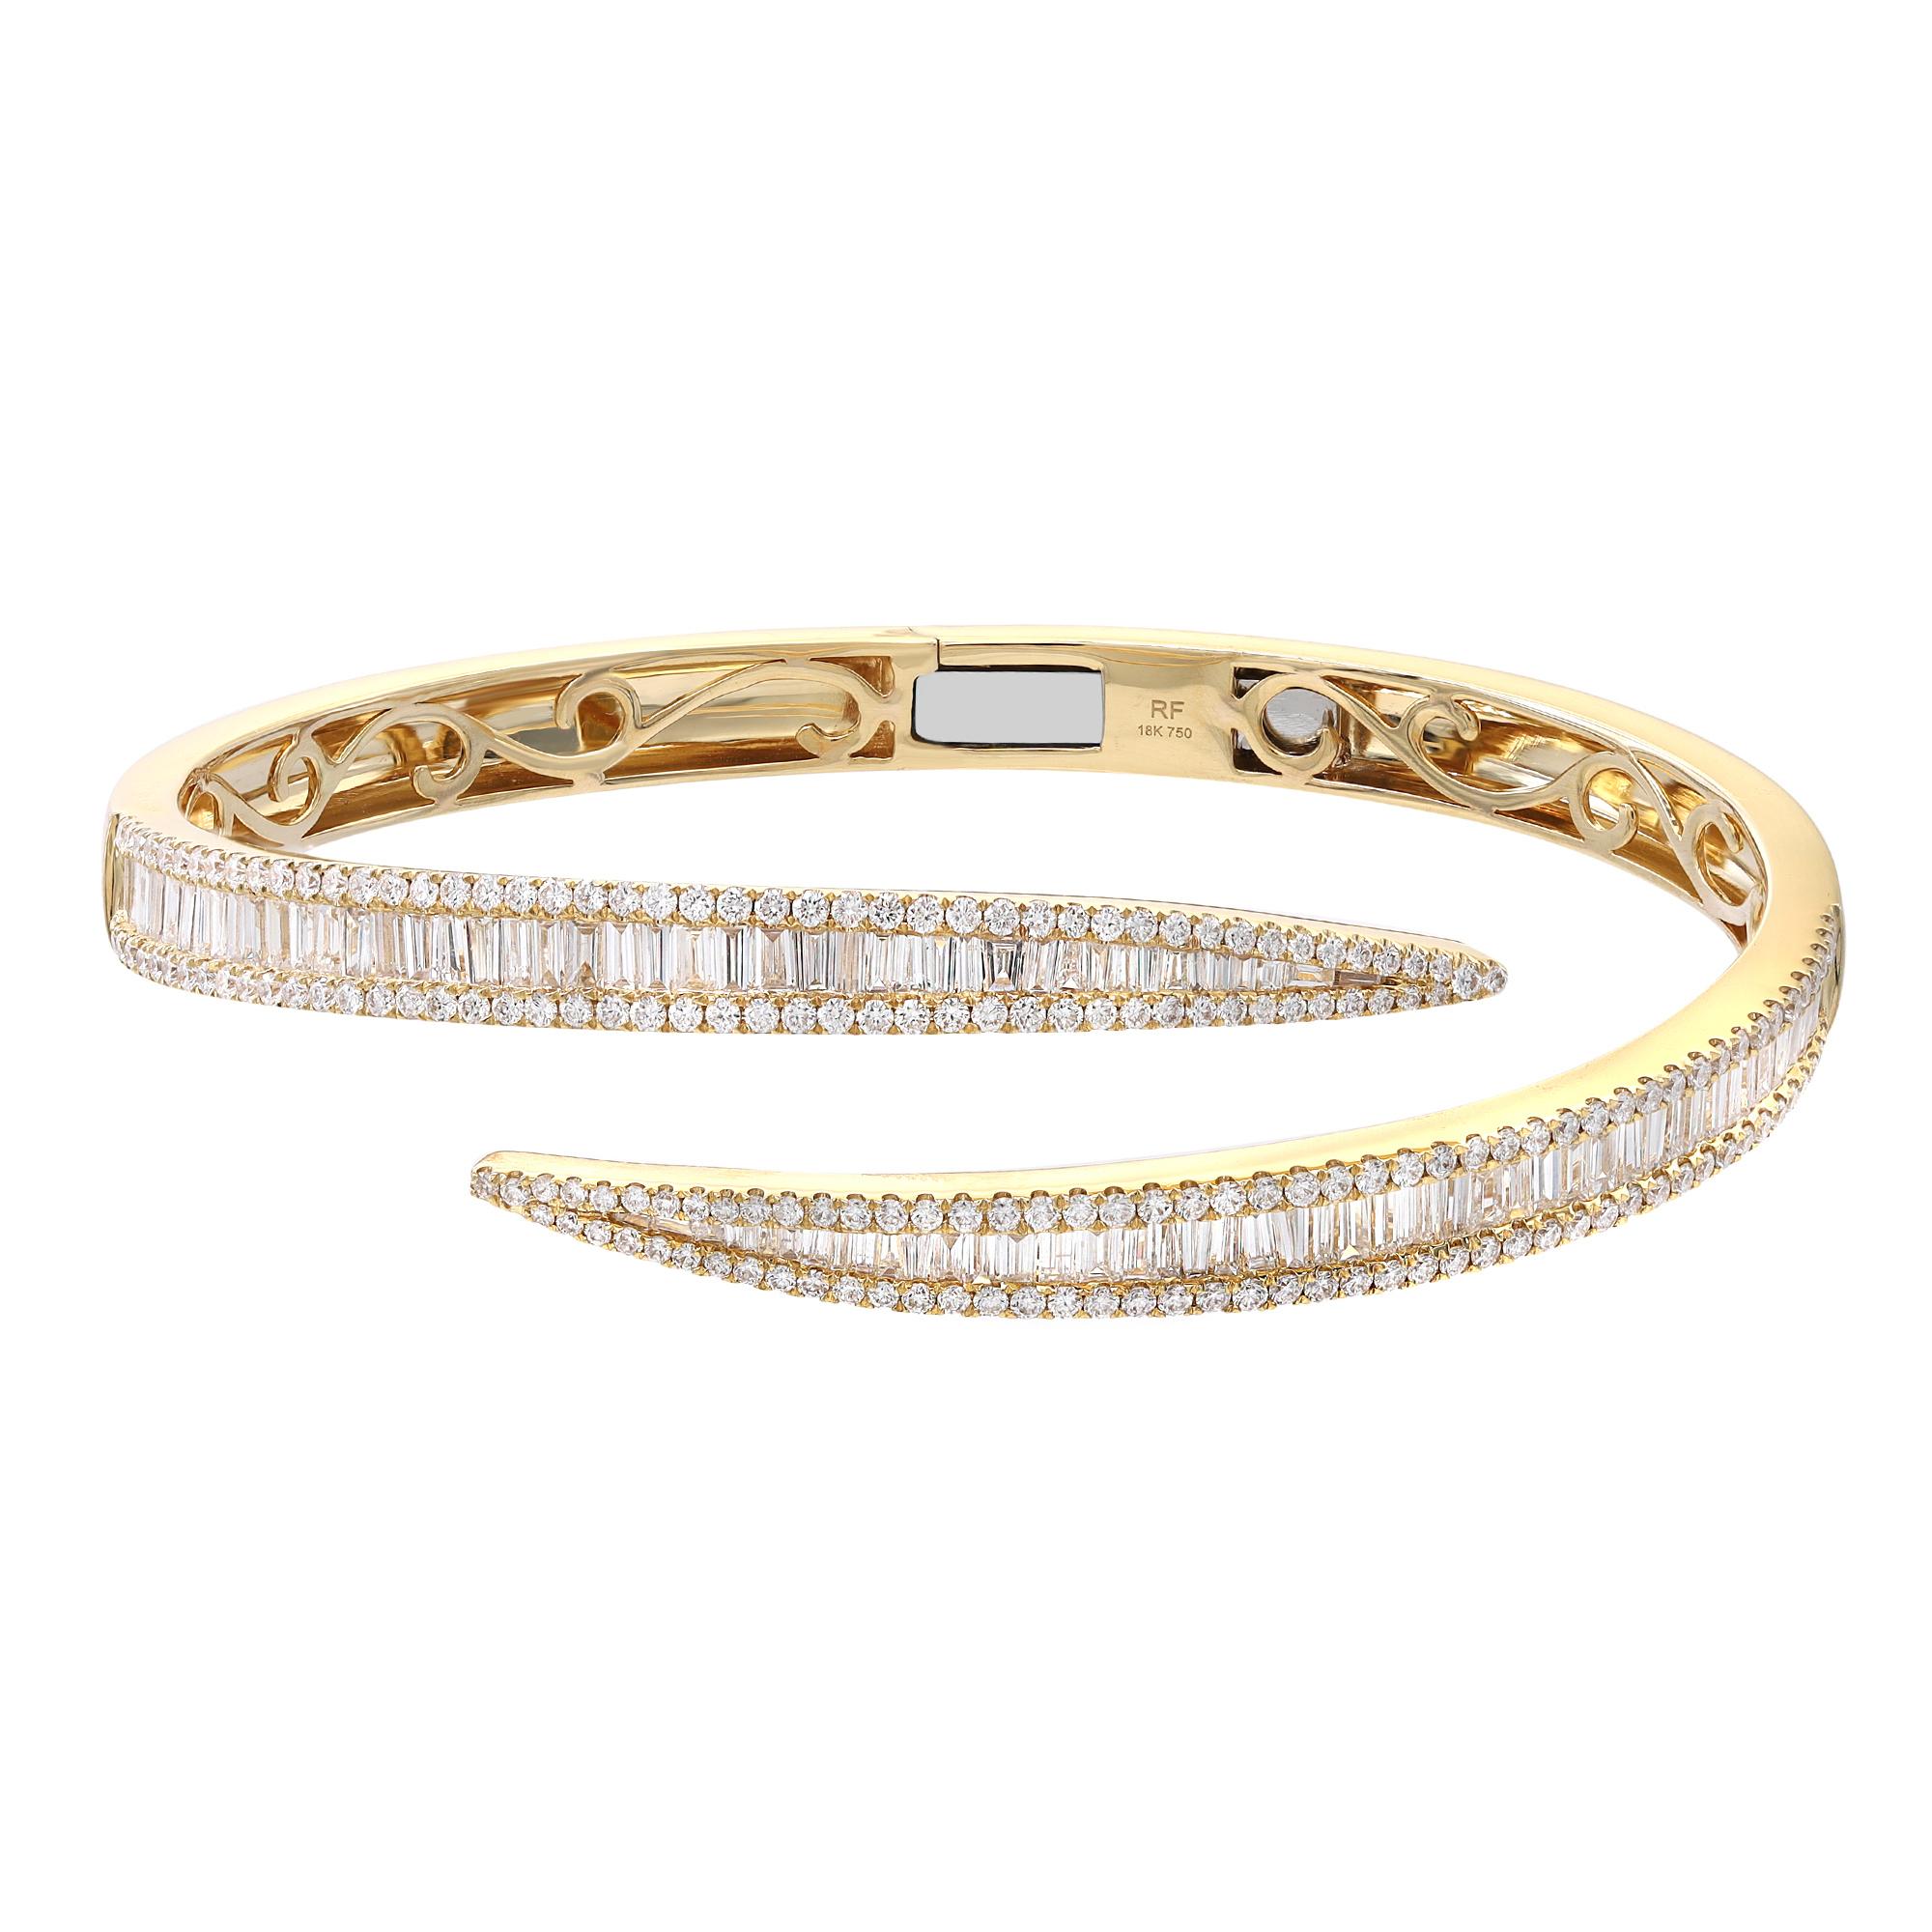 A classic look with easy elegance, this diamond bangle bracelet exudes sophistication. This stunning bracelet is crafted in 18k yellow gold and features channel set baguette cut and round cut diamonds with a total diamond weight of 3.76 carats.